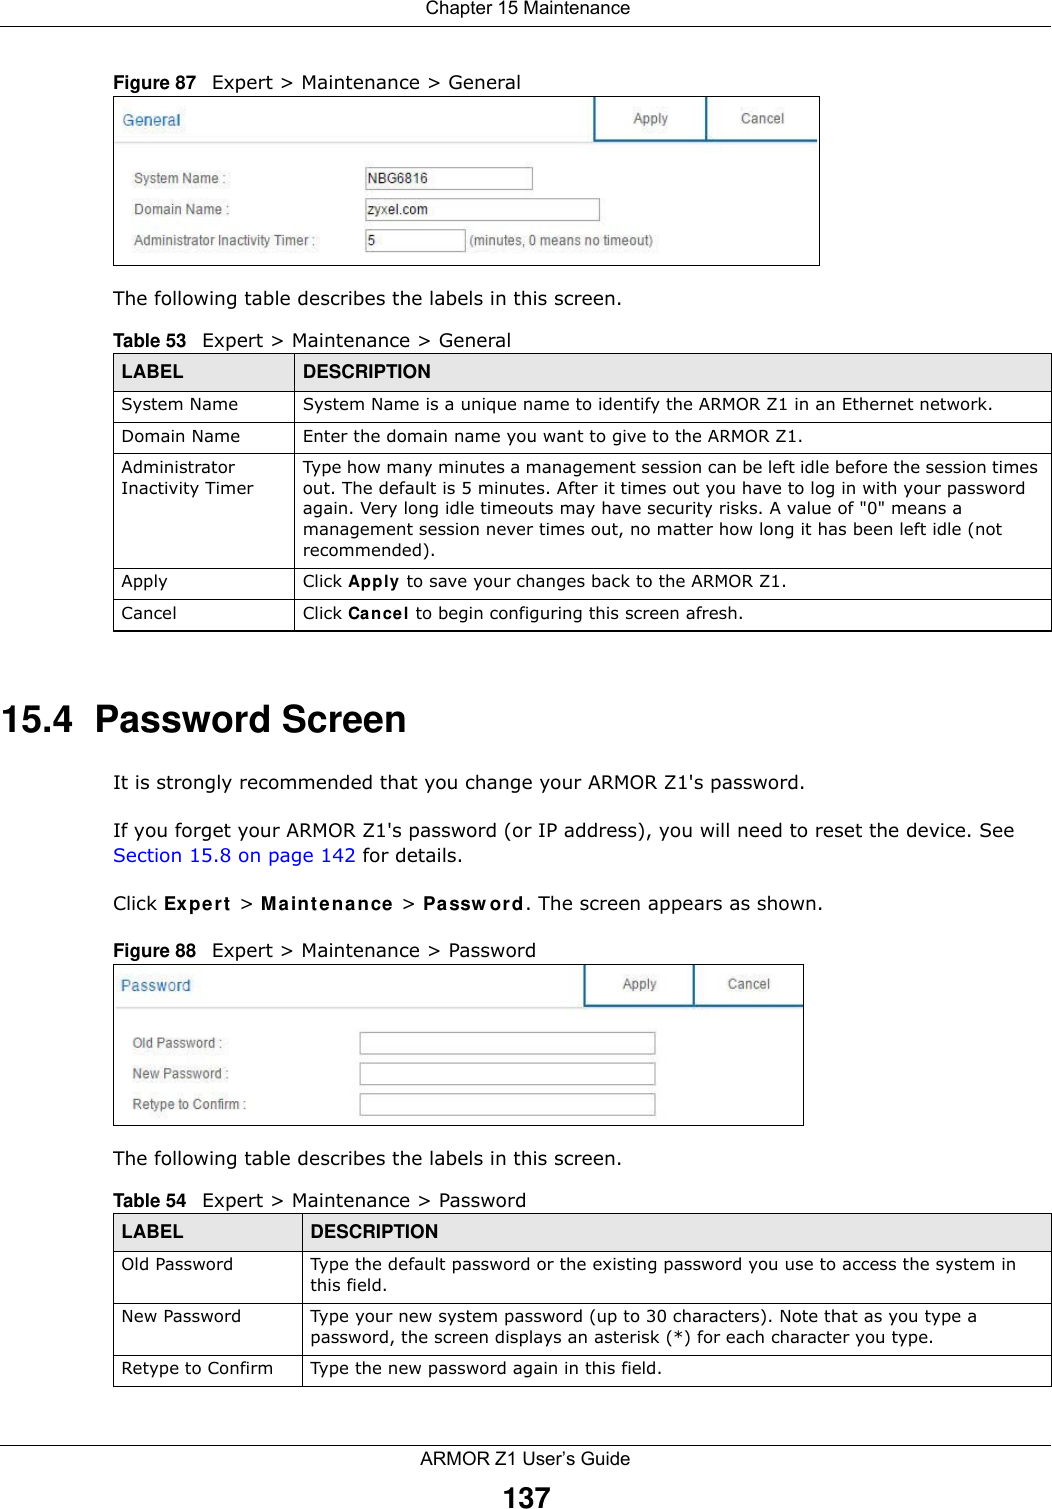  Chapter 15 MaintenanceARMOR Z1 User’s Guide137Figure 87   Expert &gt; Maintenance &gt; General The following table describes the labels in this screen.15.4  Password ScreenIt is strongly recommended that you change your ARMOR Z1&apos;s password. If you forget your ARMOR Z1&apos;s password (or IP address), you will need to reset the device. See Section 15.8 on page 142 for details.Click Expert &gt; Maintenance &gt; Password. The screen appears as shown.Figure 88   Expert &gt; Maintenance &gt; Password The following table describes the labels in this screen.Table 53   Expert &gt; Maintenance &gt; GeneralLABEL DESCRIPTIONSystem Name System Name is a unique name to identify the ARMOR Z1 in an Ethernet network.Domain Name Enter the domain name you want to give to the ARMOR Z1.Administrator Inactivity TimerType how many minutes a management session can be left idle before the session times out. The default is 5 minutes. After it times out you have to log in with your password again. Very long idle timeouts may have security risks. A value of &quot;0&quot; means a management session never times out, no matter how long it has been left idle (not recommended).Apply Click Apply to save your changes back to the ARMOR Z1.Cancel Click Cancel to begin configuring this screen afresh.Table 54   Expert &gt; Maintenance &gt; PasswordLABEL DESCRIPTIONOld Password Type the default password or the existing password you use to access the system in this field.New Password Type your new system password (up to 30 characters). Note that as you type a password, the screen displays an asterisk (*) for each character you type.Retype to Confirm Type the new password again in this field.